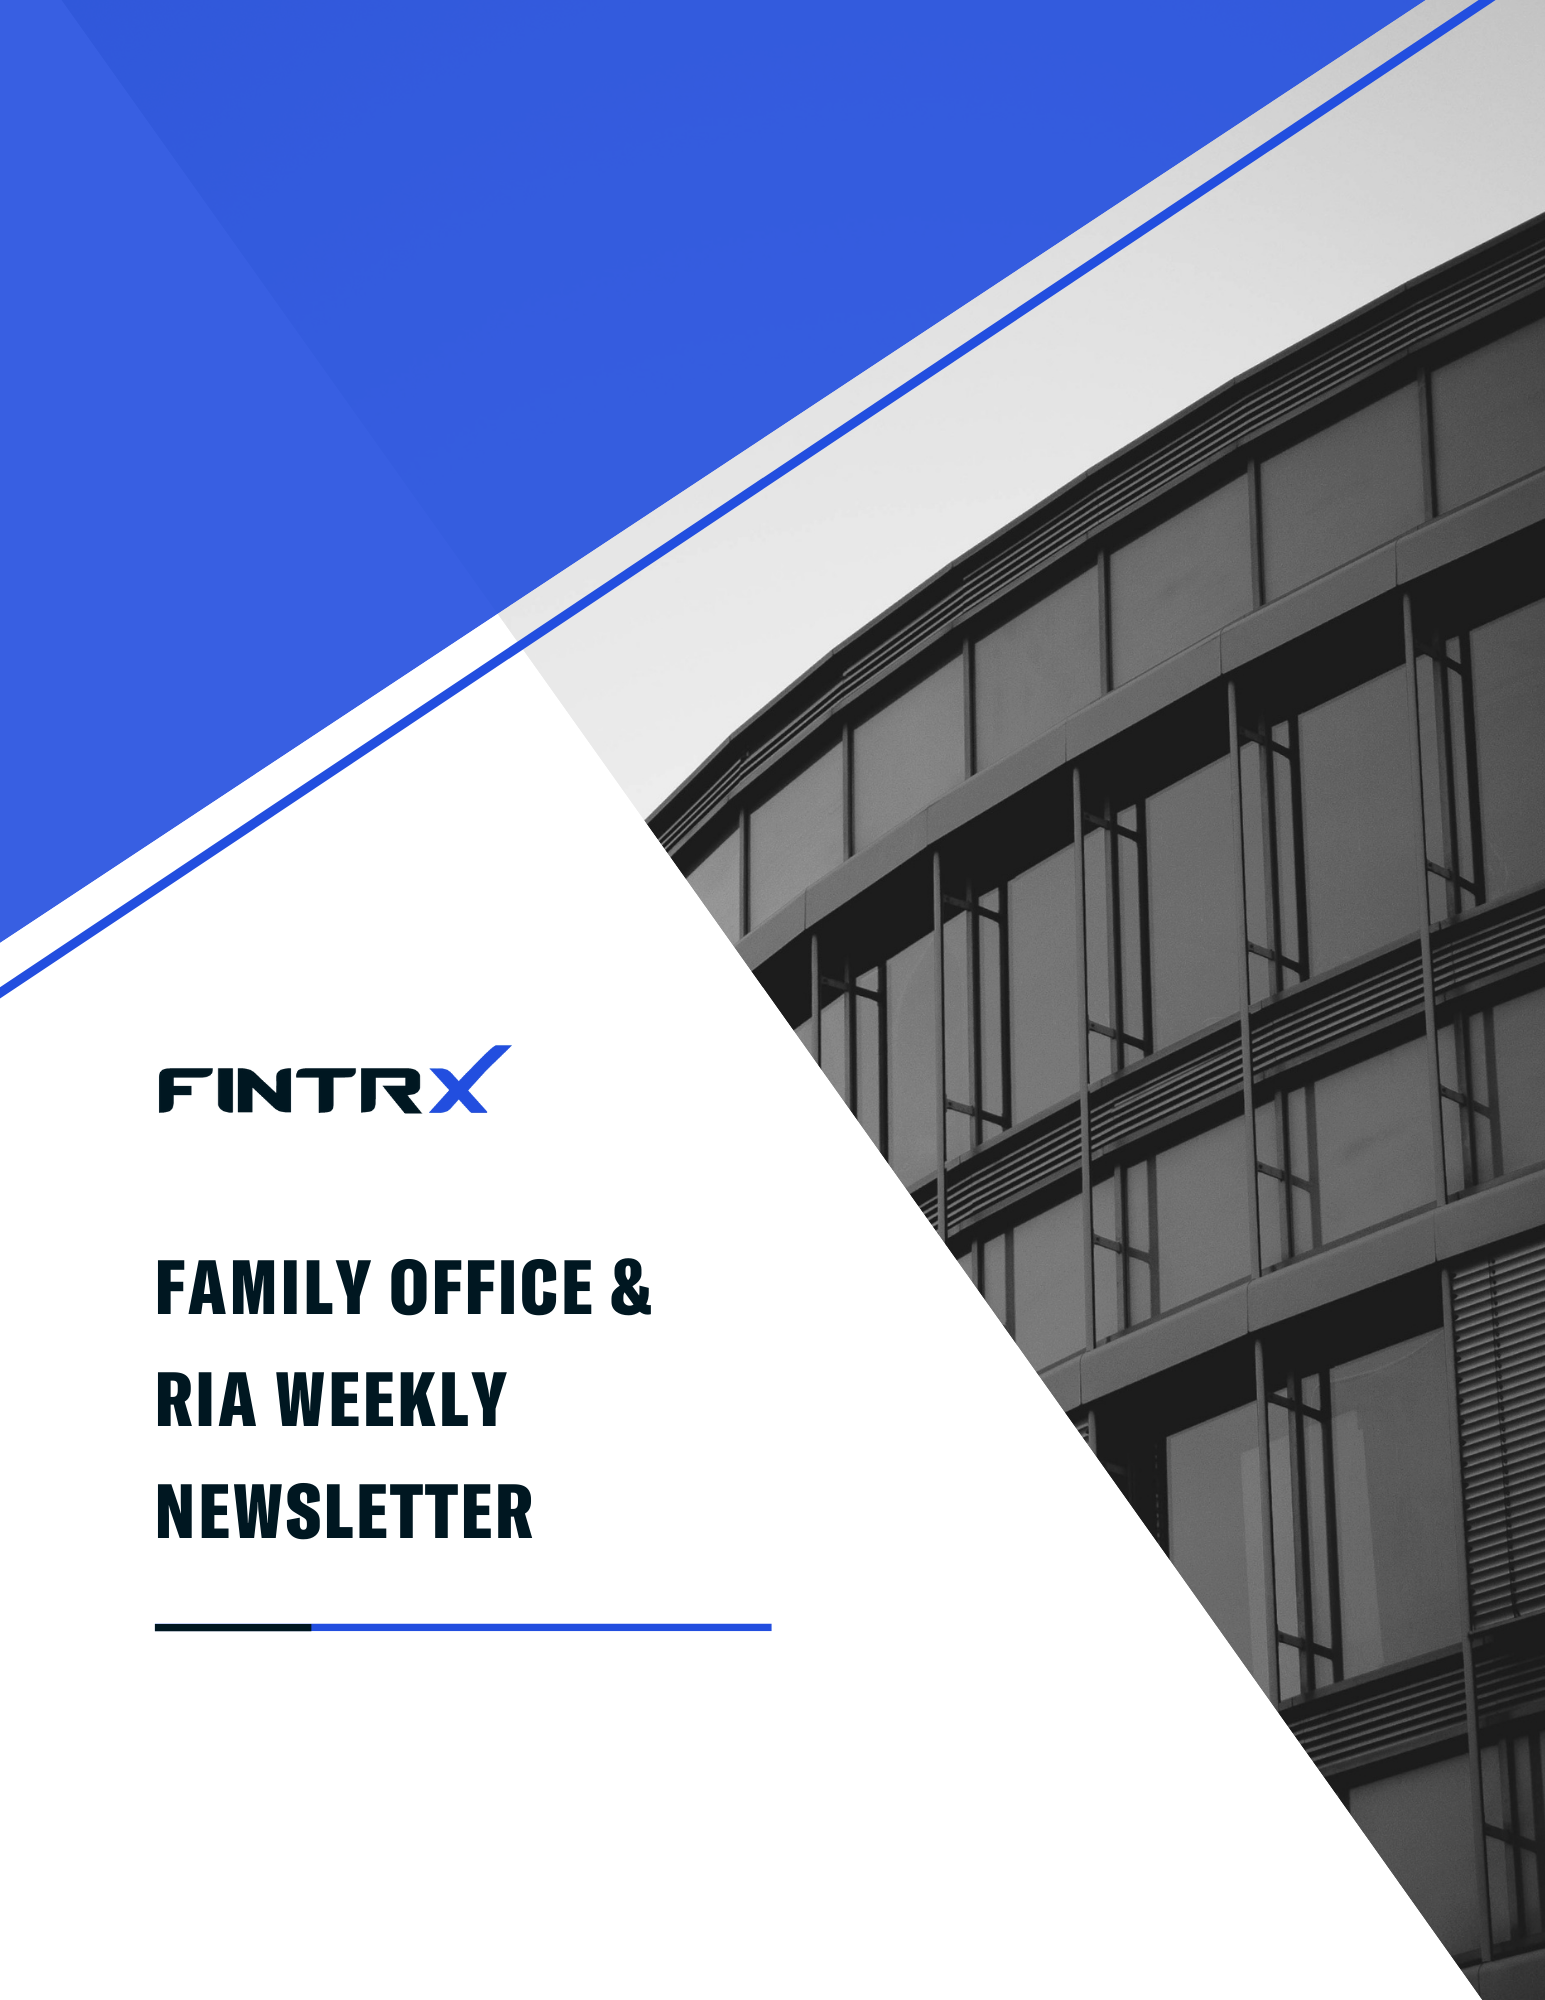 FINTRX Weekly Family Office & RIA News, Insights and trends.